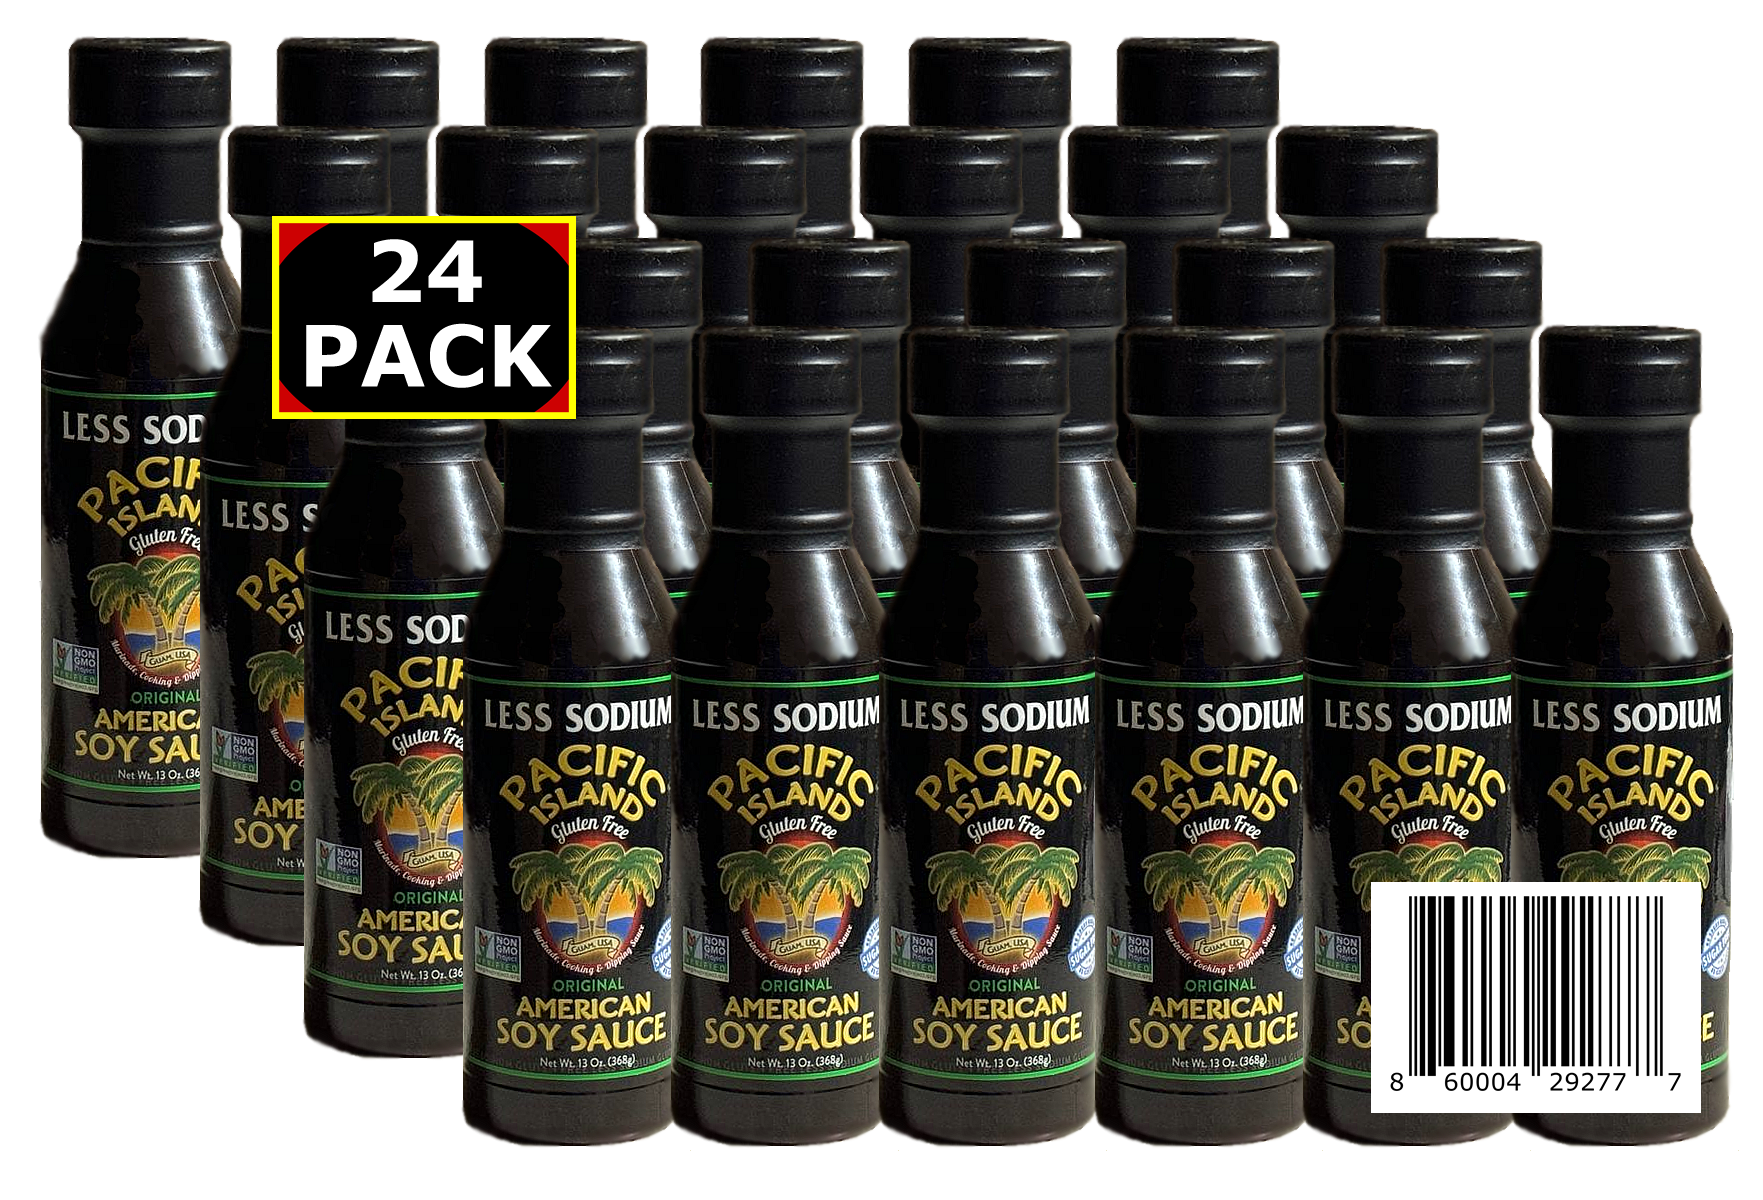 Pacific Island Soy Sauce (24) Pack